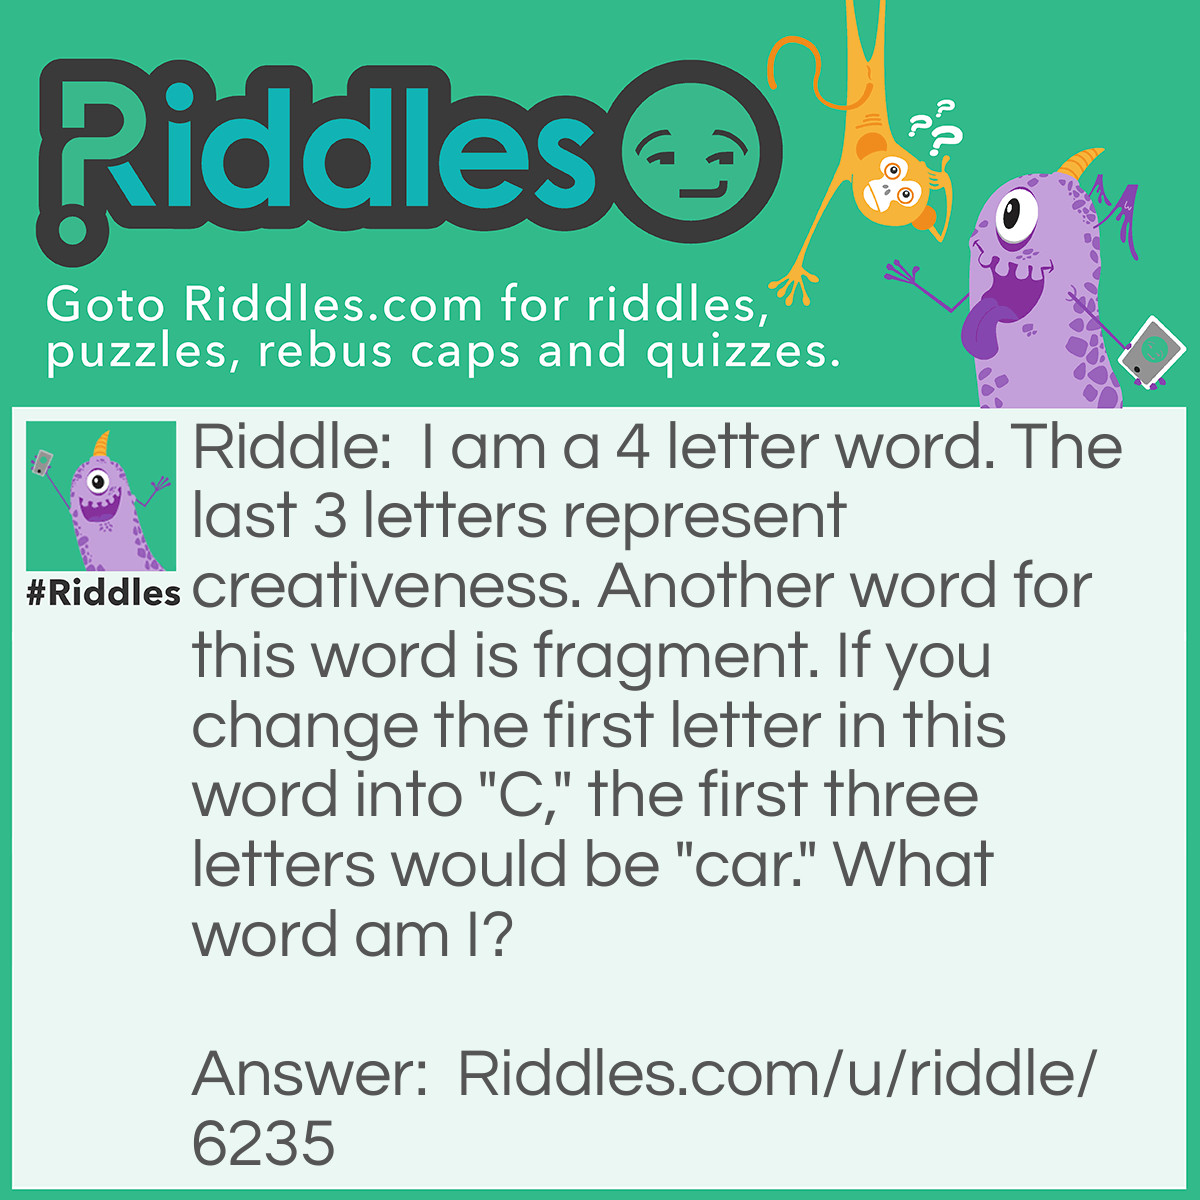 Riddle: I am a 4 letter word. The last 3 letters represent creativeness. Another word for this word is fragment. If you change the first letter in this word into "C," the first three letters would be "car." What word am I? Answer: Part ;)